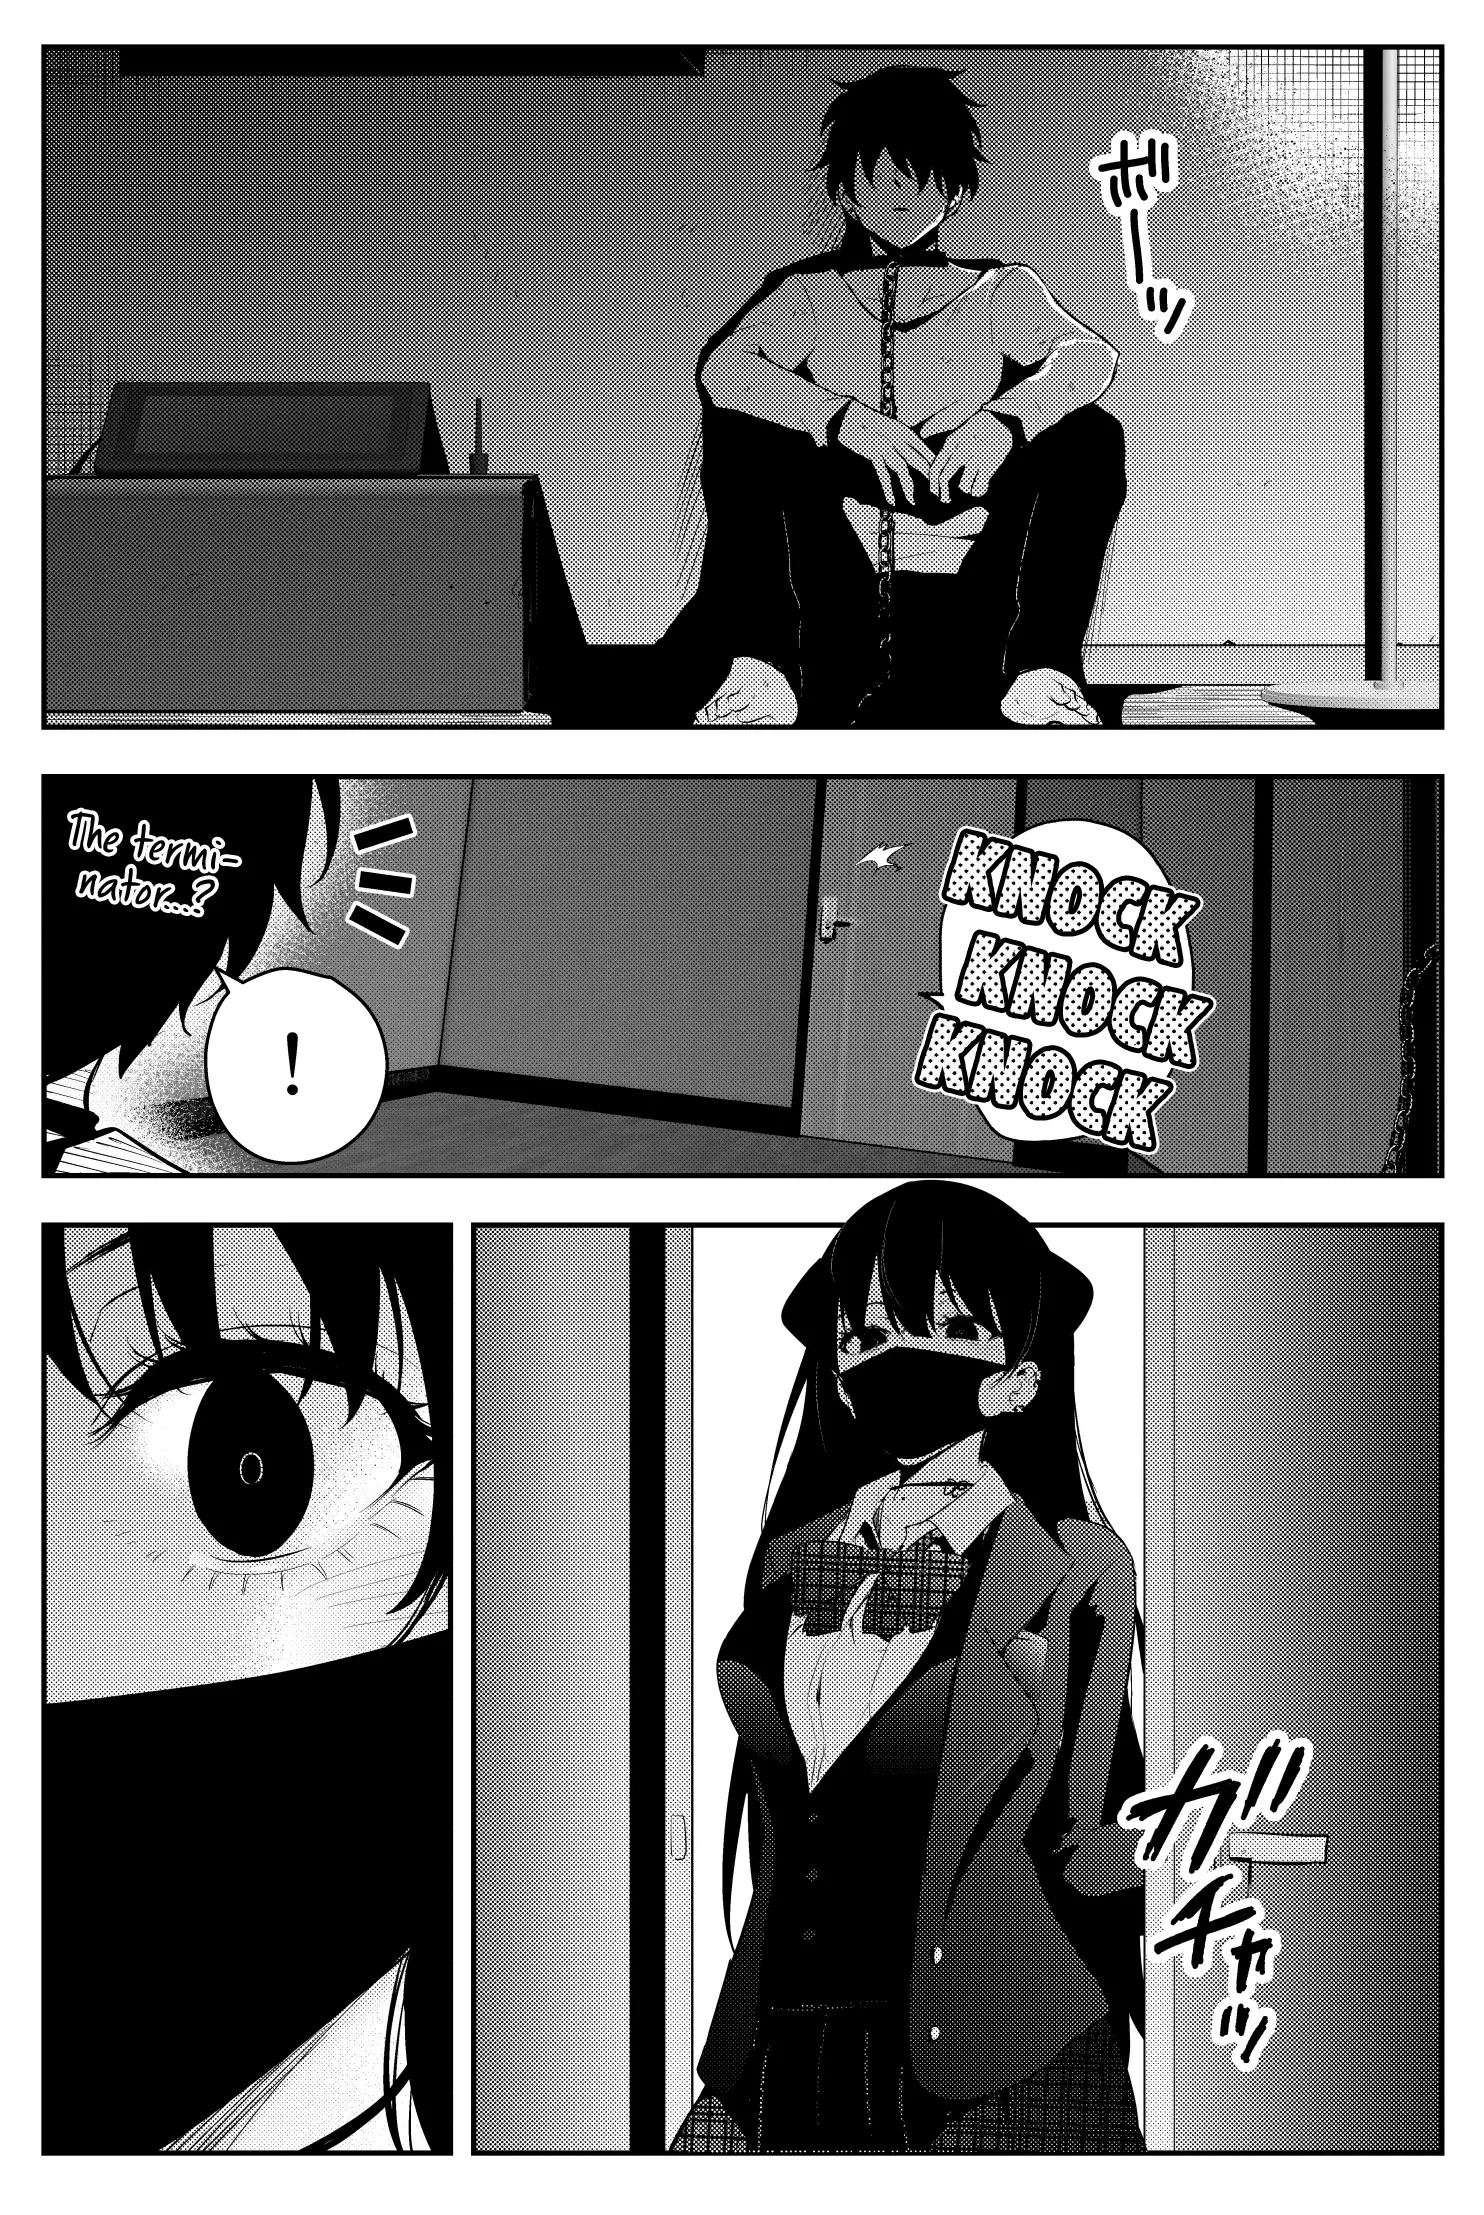 The Story Of A Manga Artist Confined By A Strange High School Girl - 3 page 1-e5fb0d0f